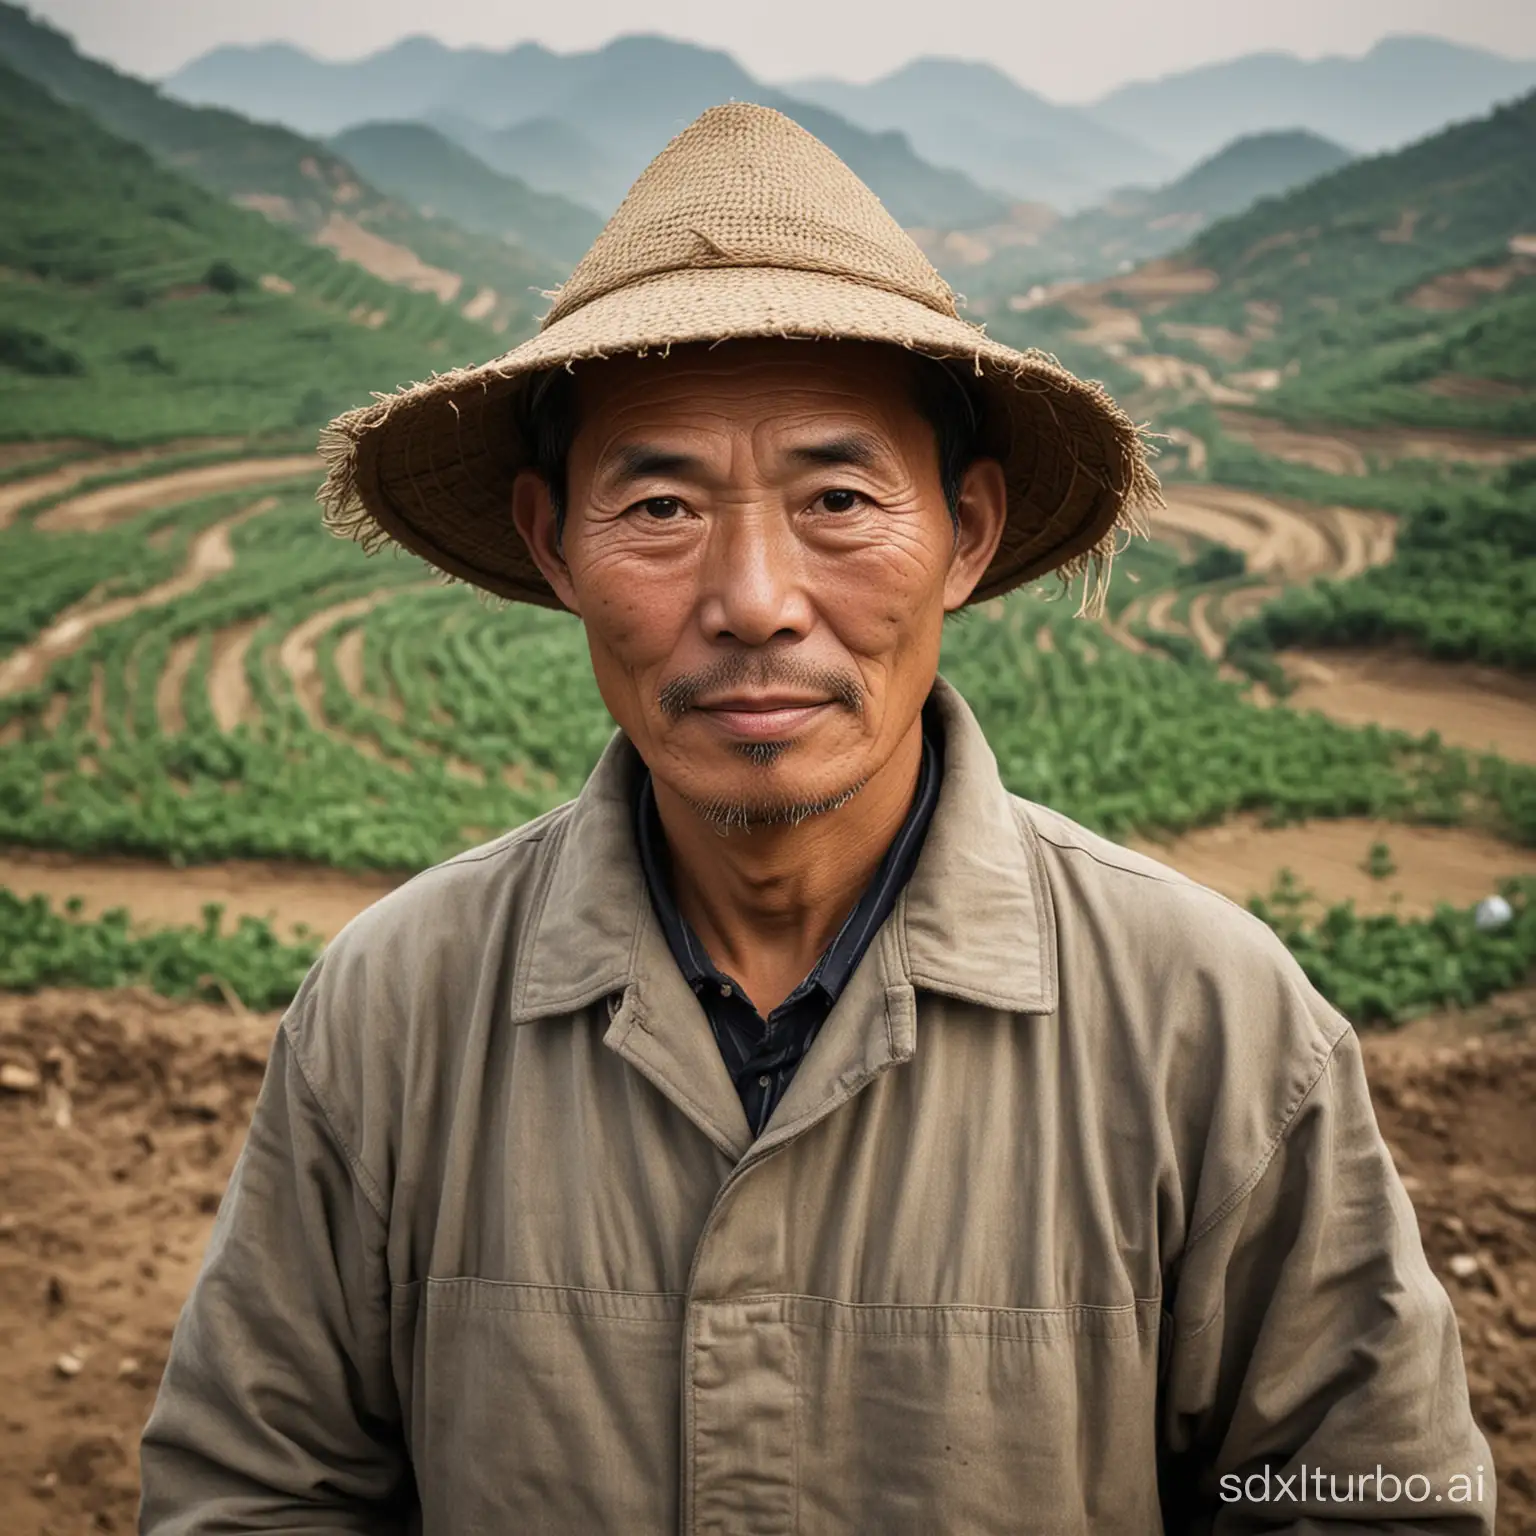 A 52-year-old Chinese farmer